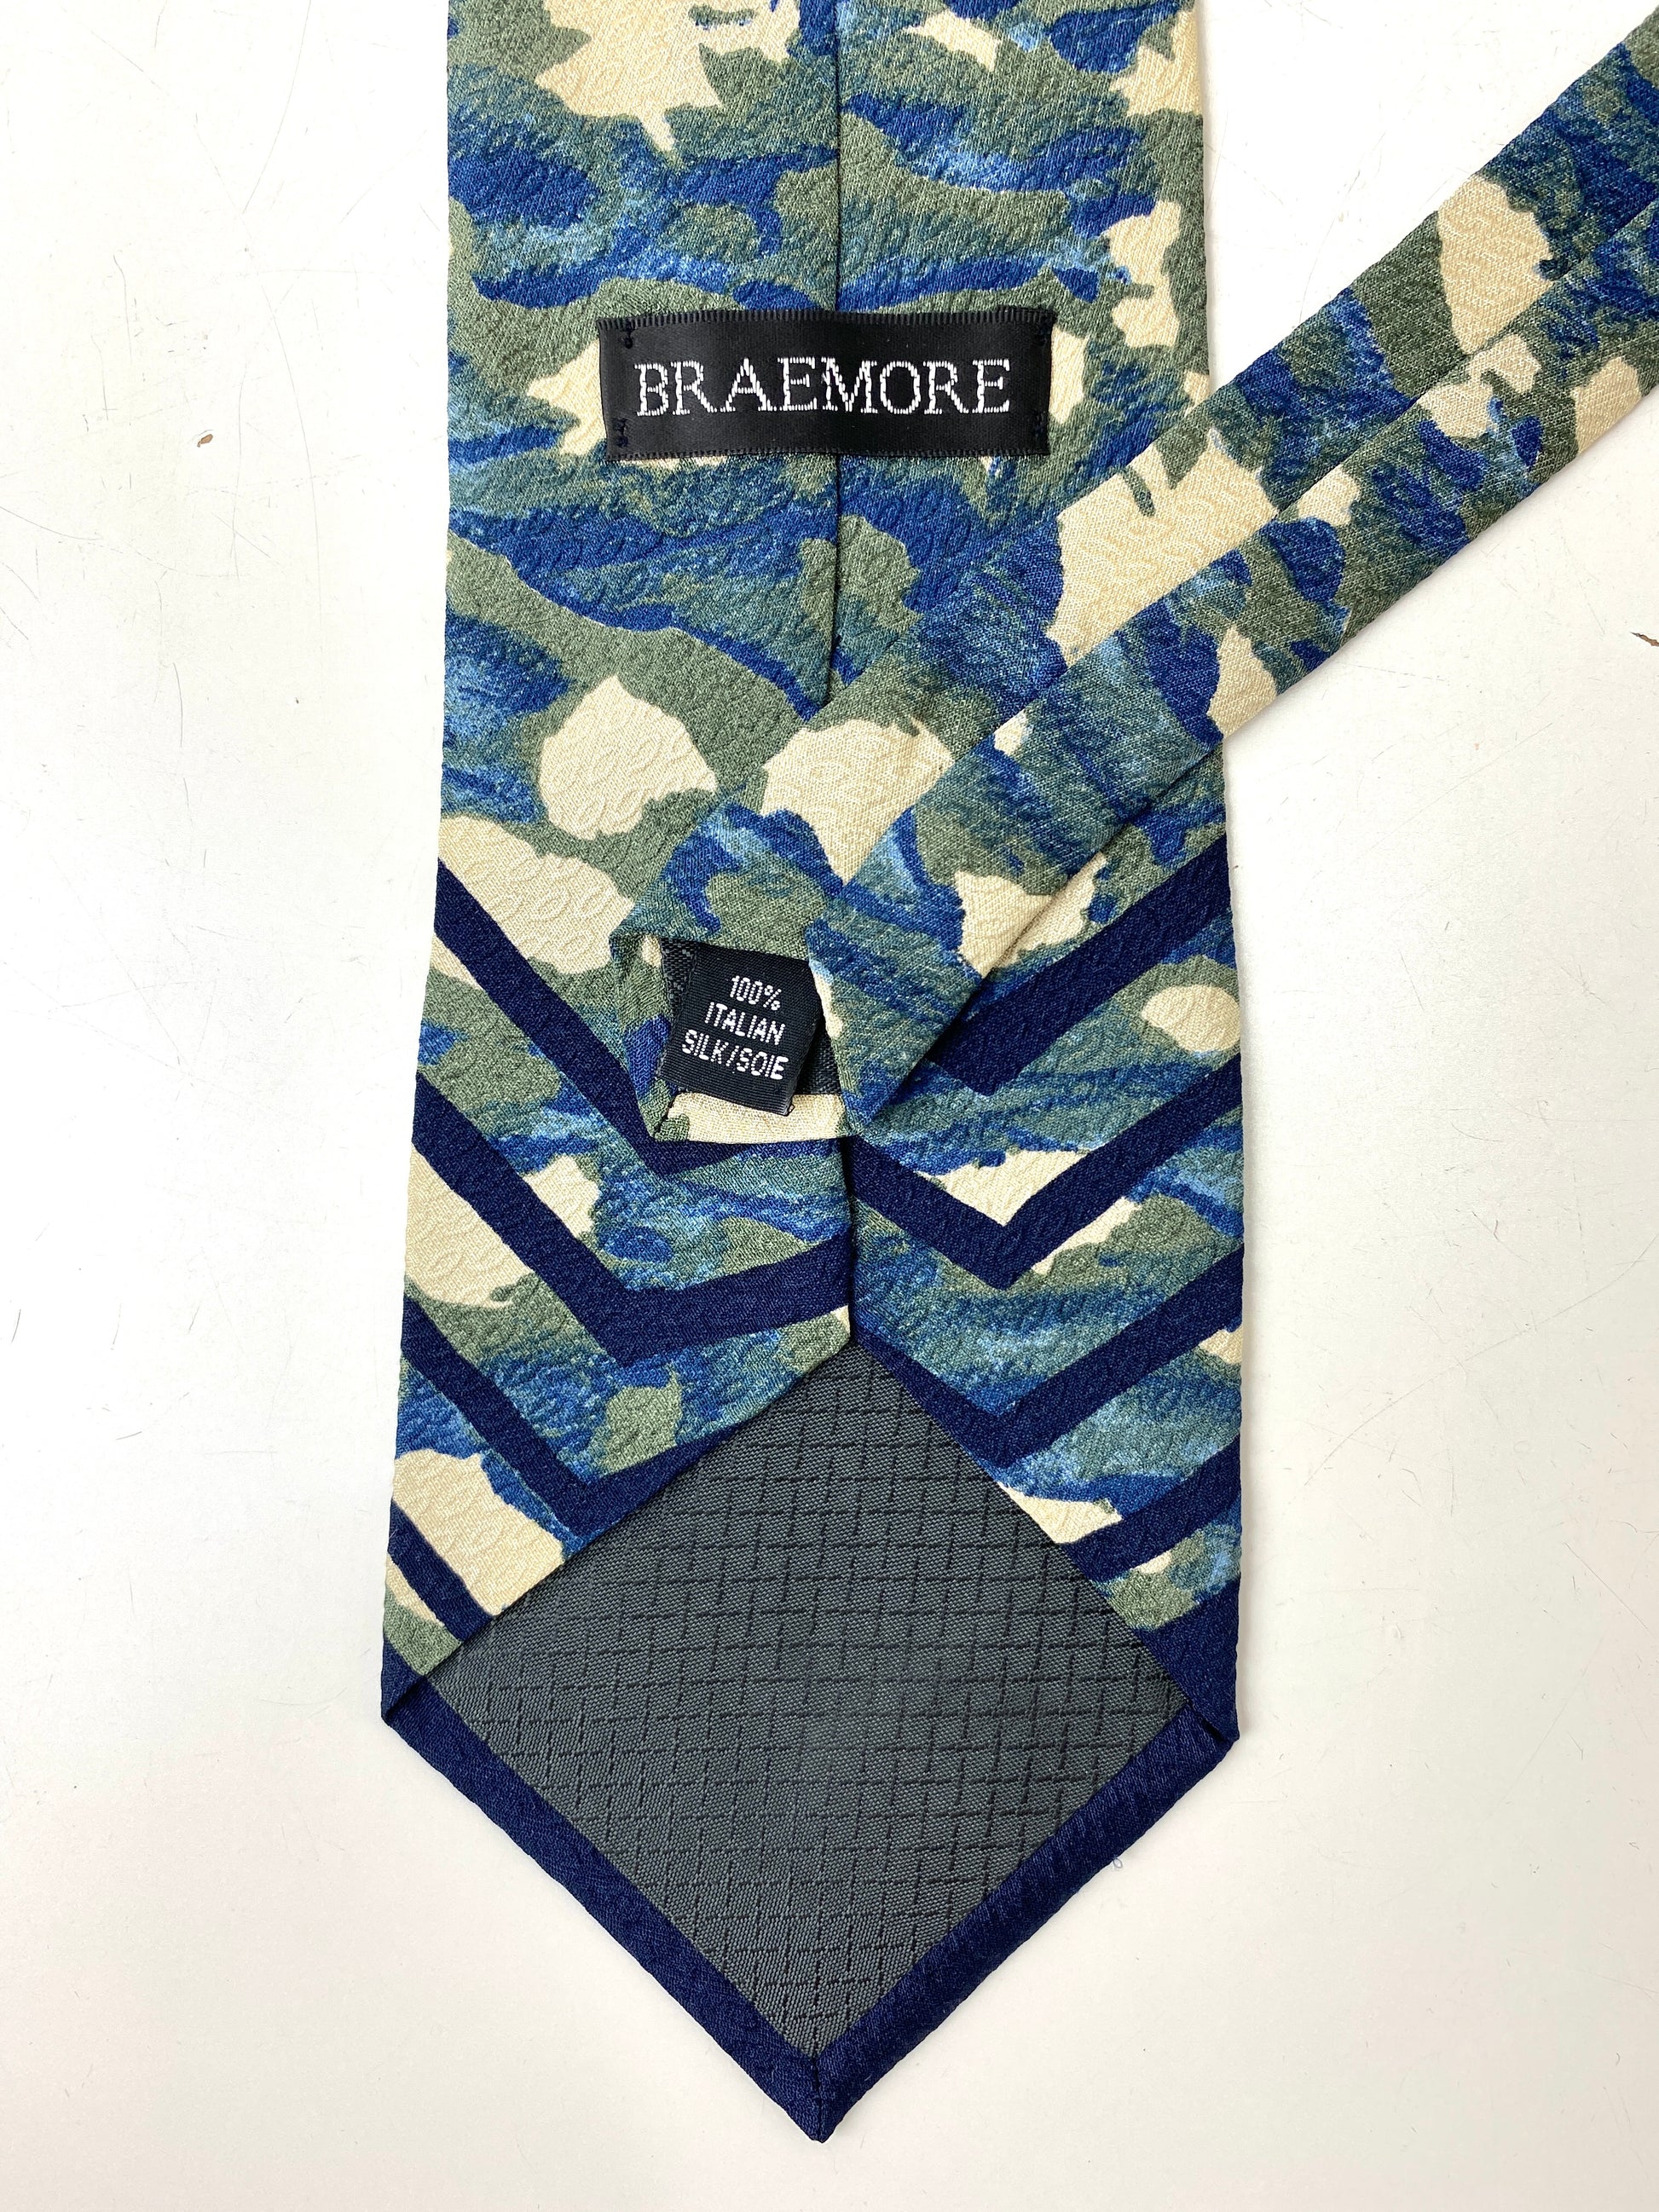 Back and labels of: 90s Deadstock Silk Necktie, Men's Vintage Blue/ Green/ Tan Abstract Camo Pattern, NOS